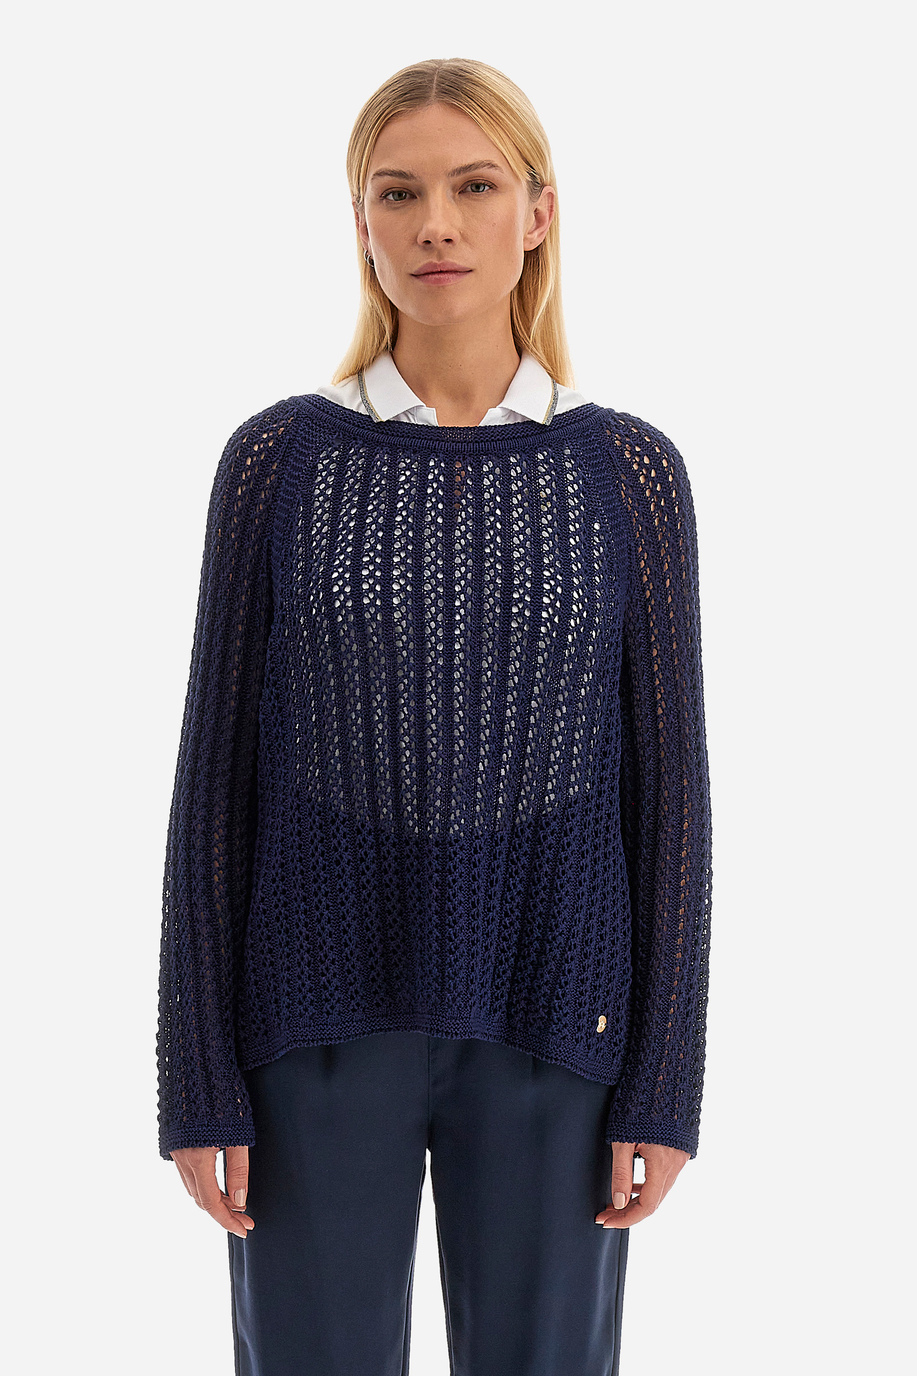 Women's round neck tricot sweater in solid color Spring Weekend capsule - Victoire - Apparel | La Martina - Official Online Shop